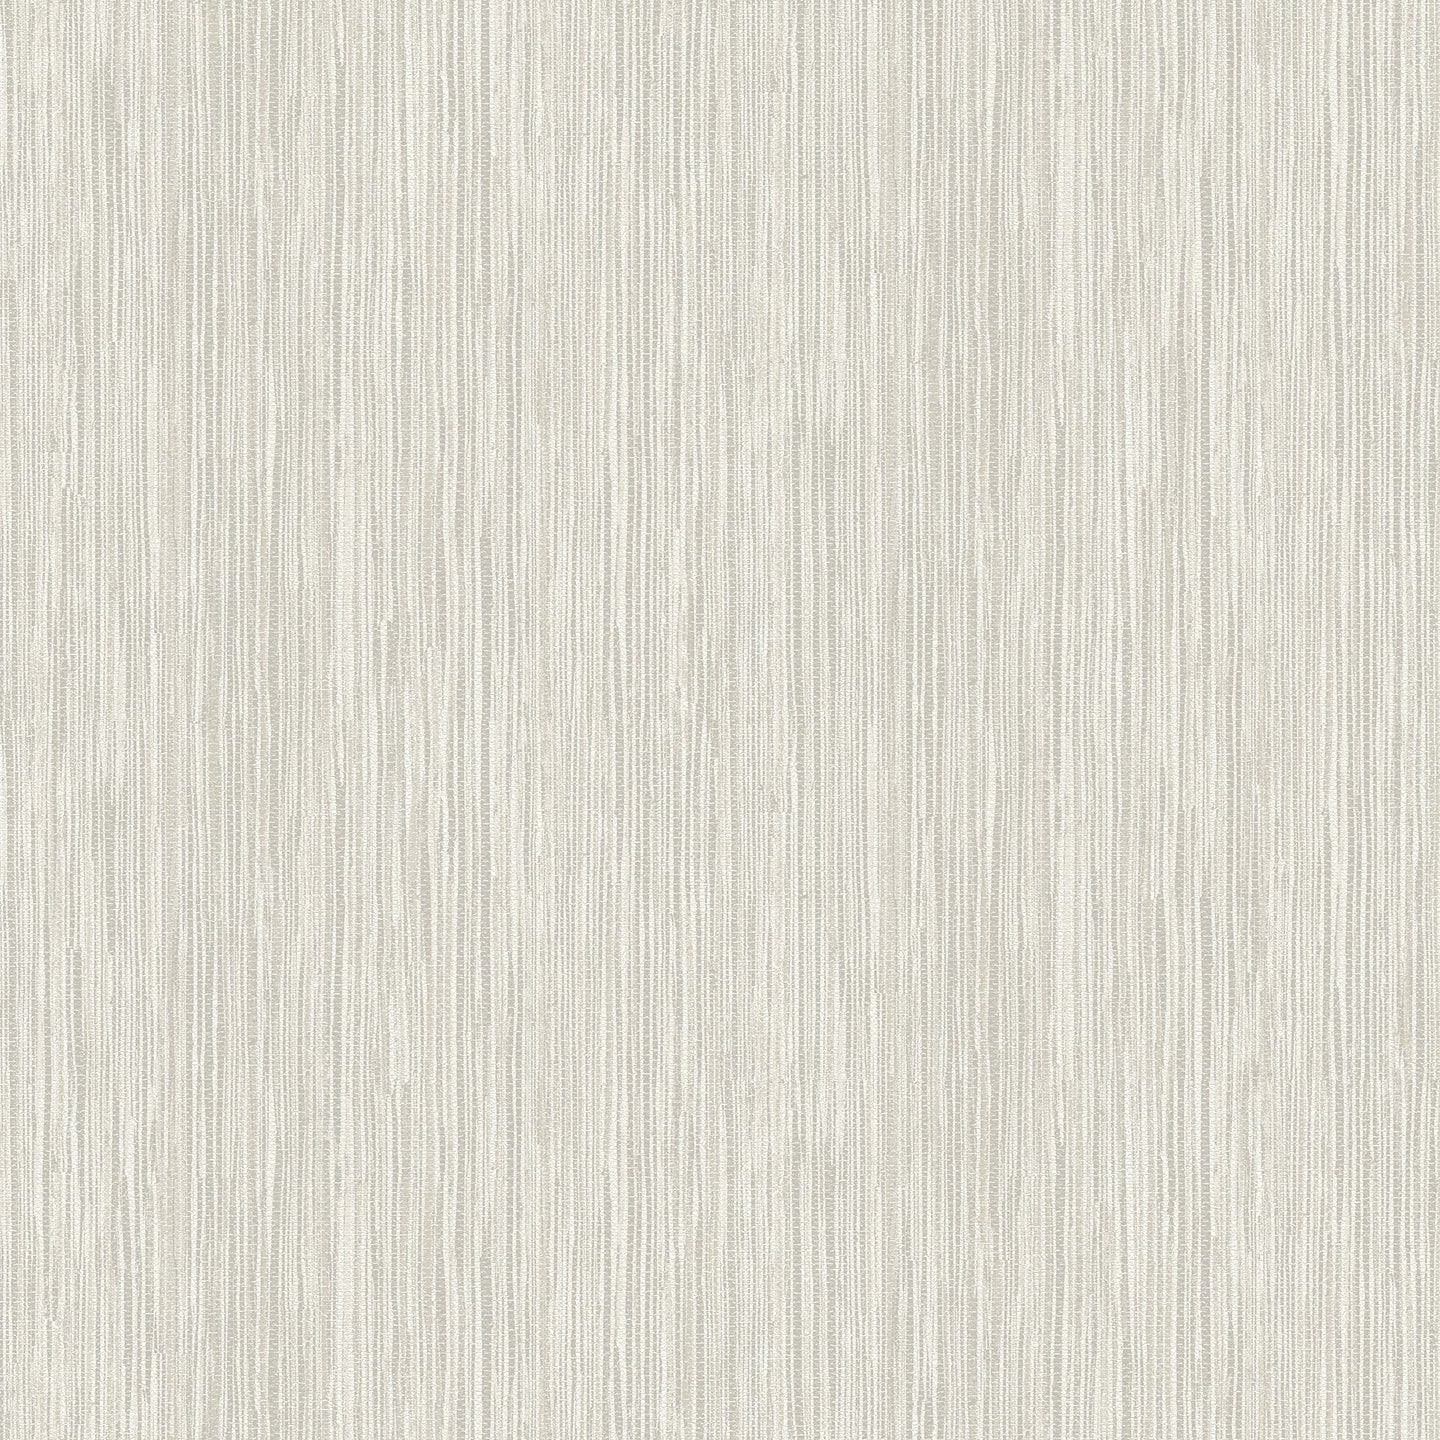 Add subtle depth to white walls with this creamy faux grasscloth wallpaper. The vertical strips are a gentle blend of whit...